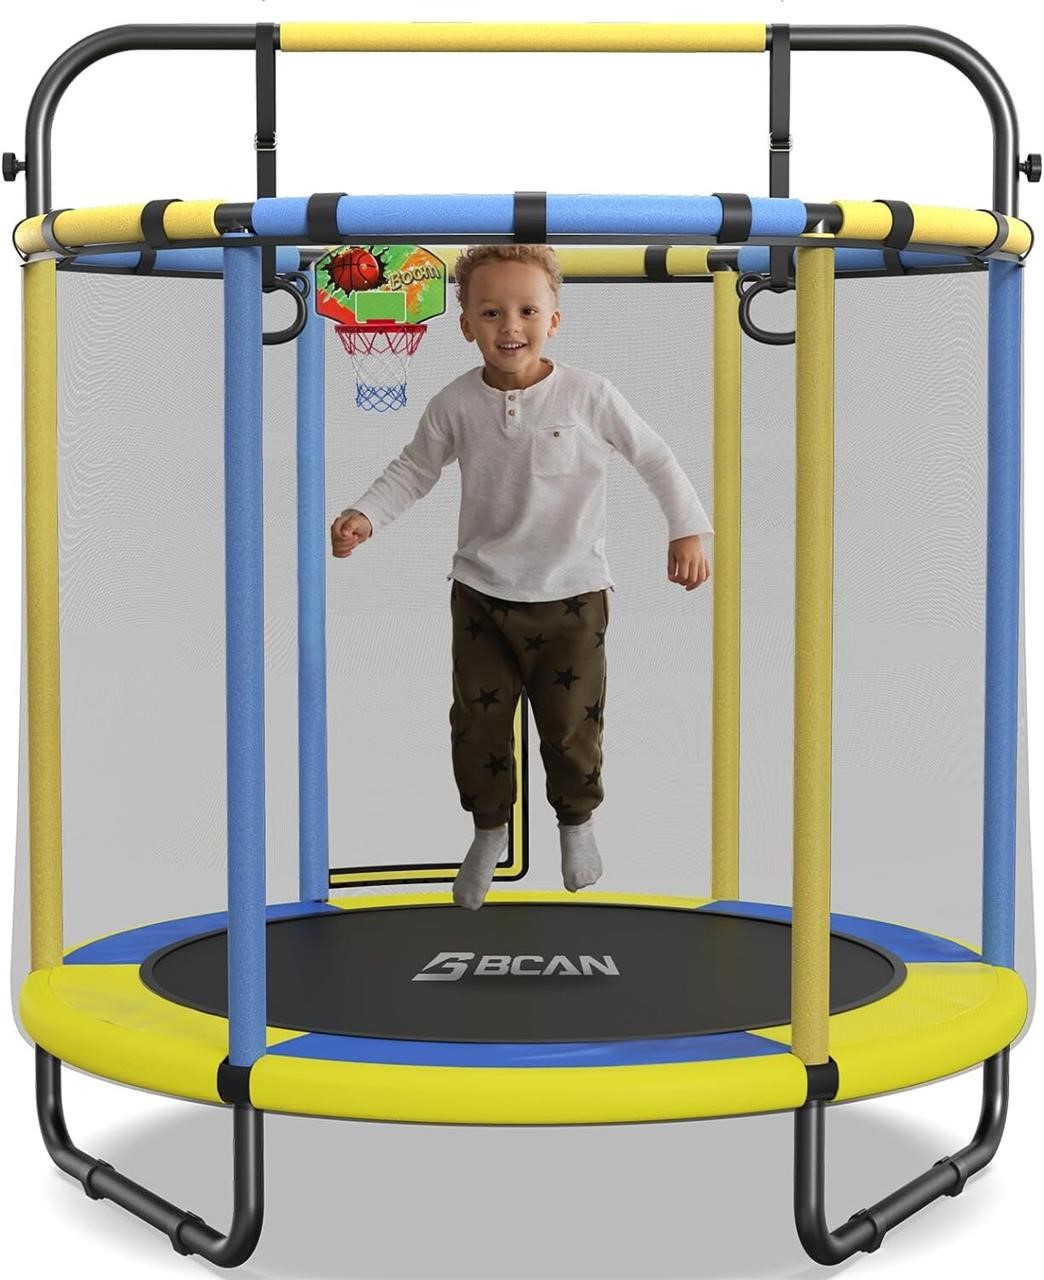 BCAN 60'/48 Mini Trampoline for Ages 1-8